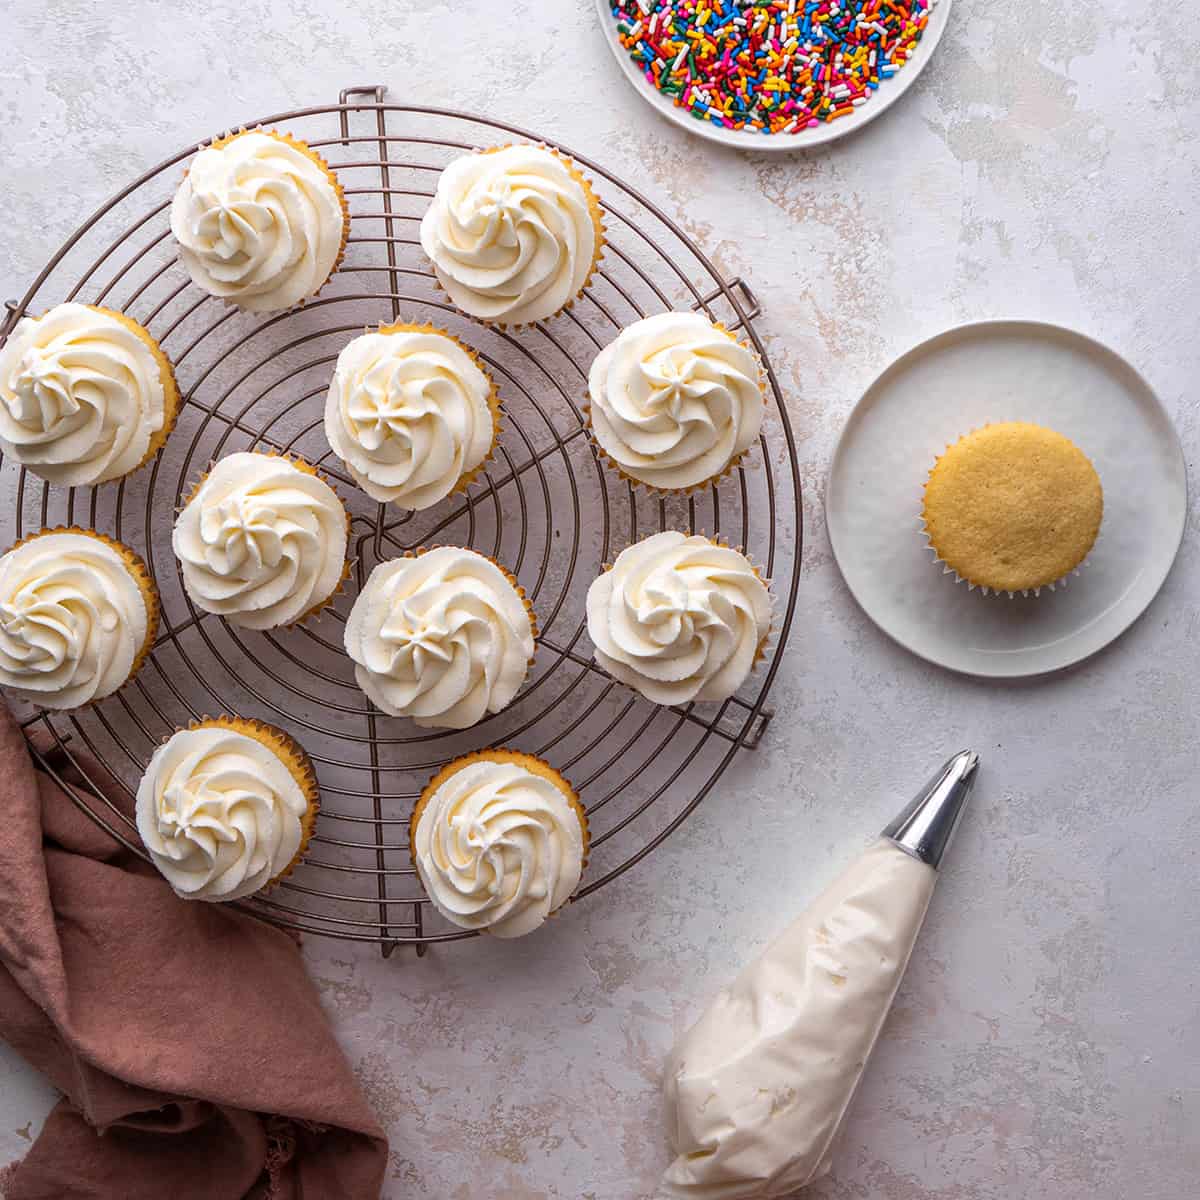 two photos showing How to Make Vanilla Cupcakes - frosting the cupcakes